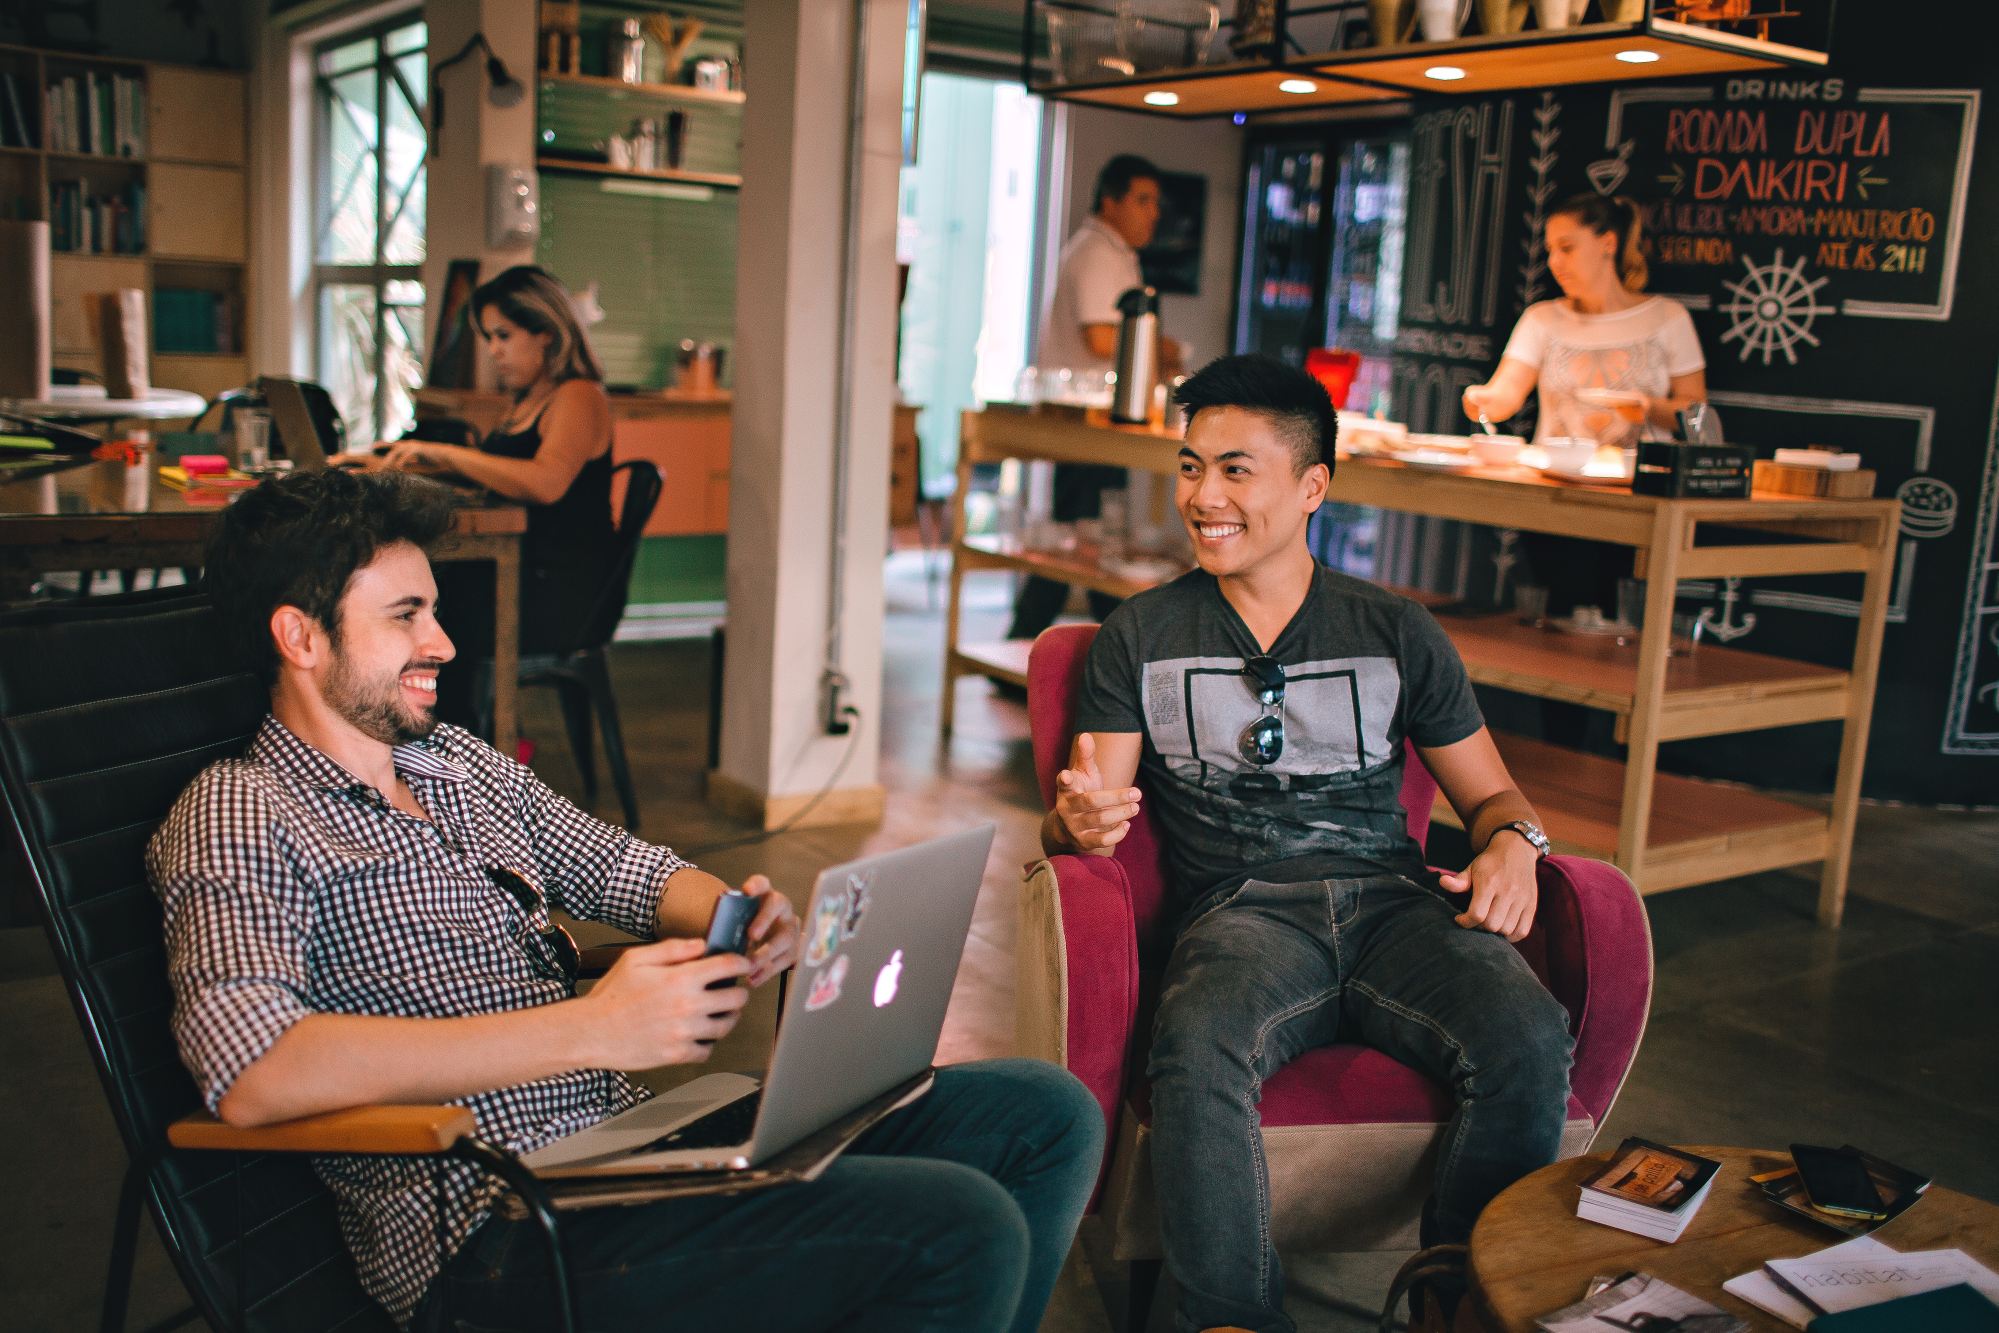 5 Simple Ideas to Build Relationship in a Coworking Space